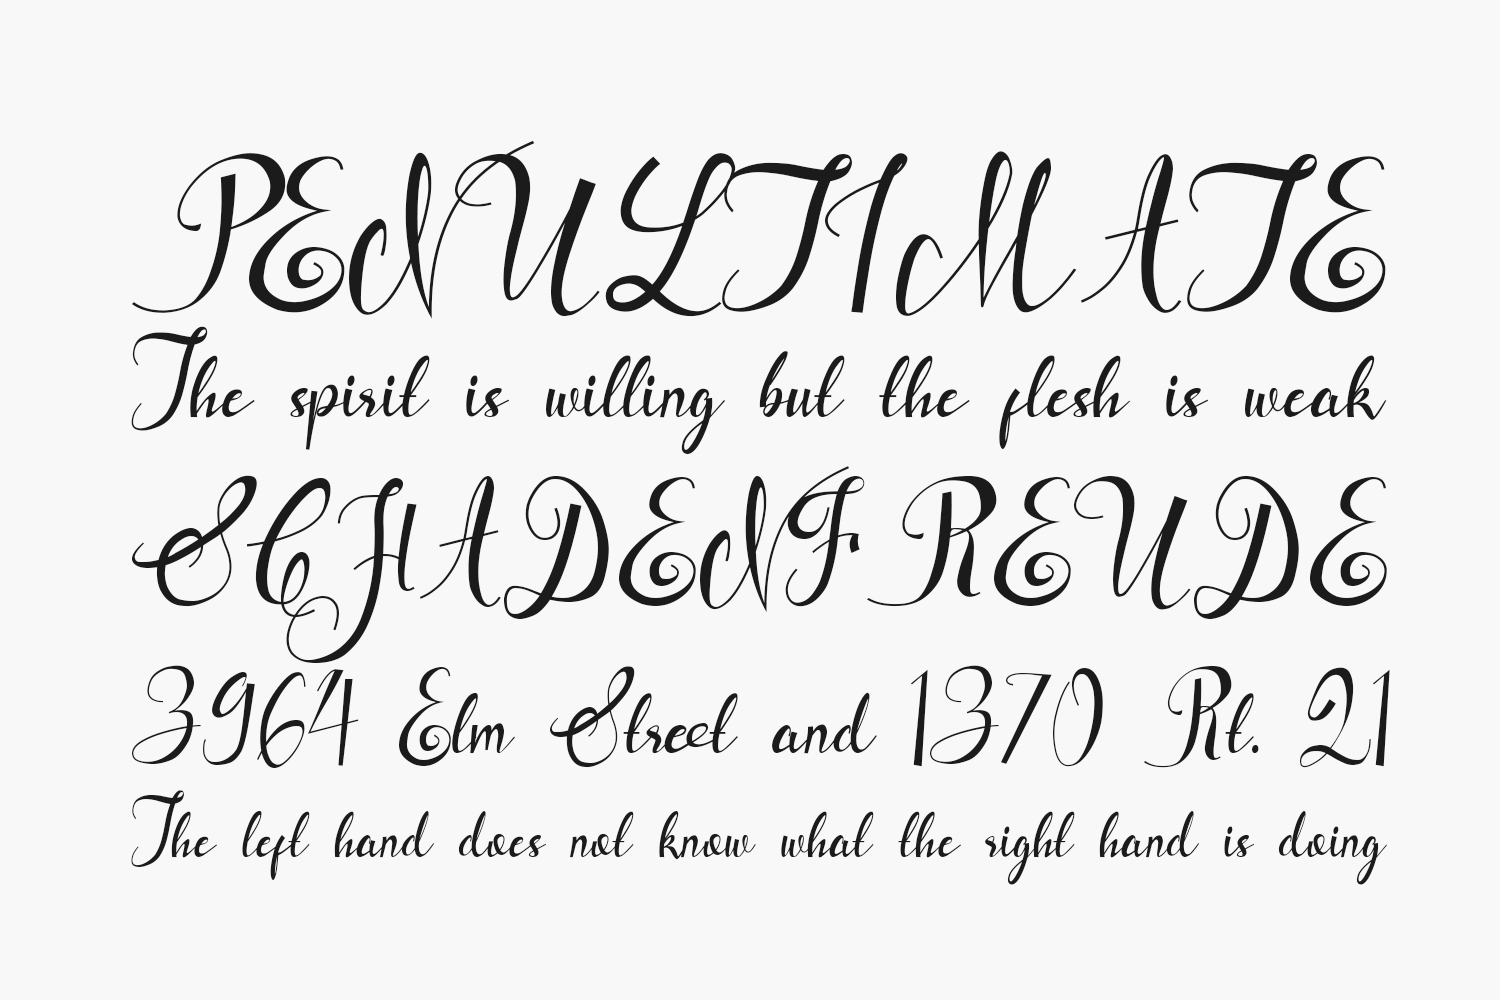 Spring Butter Free Font